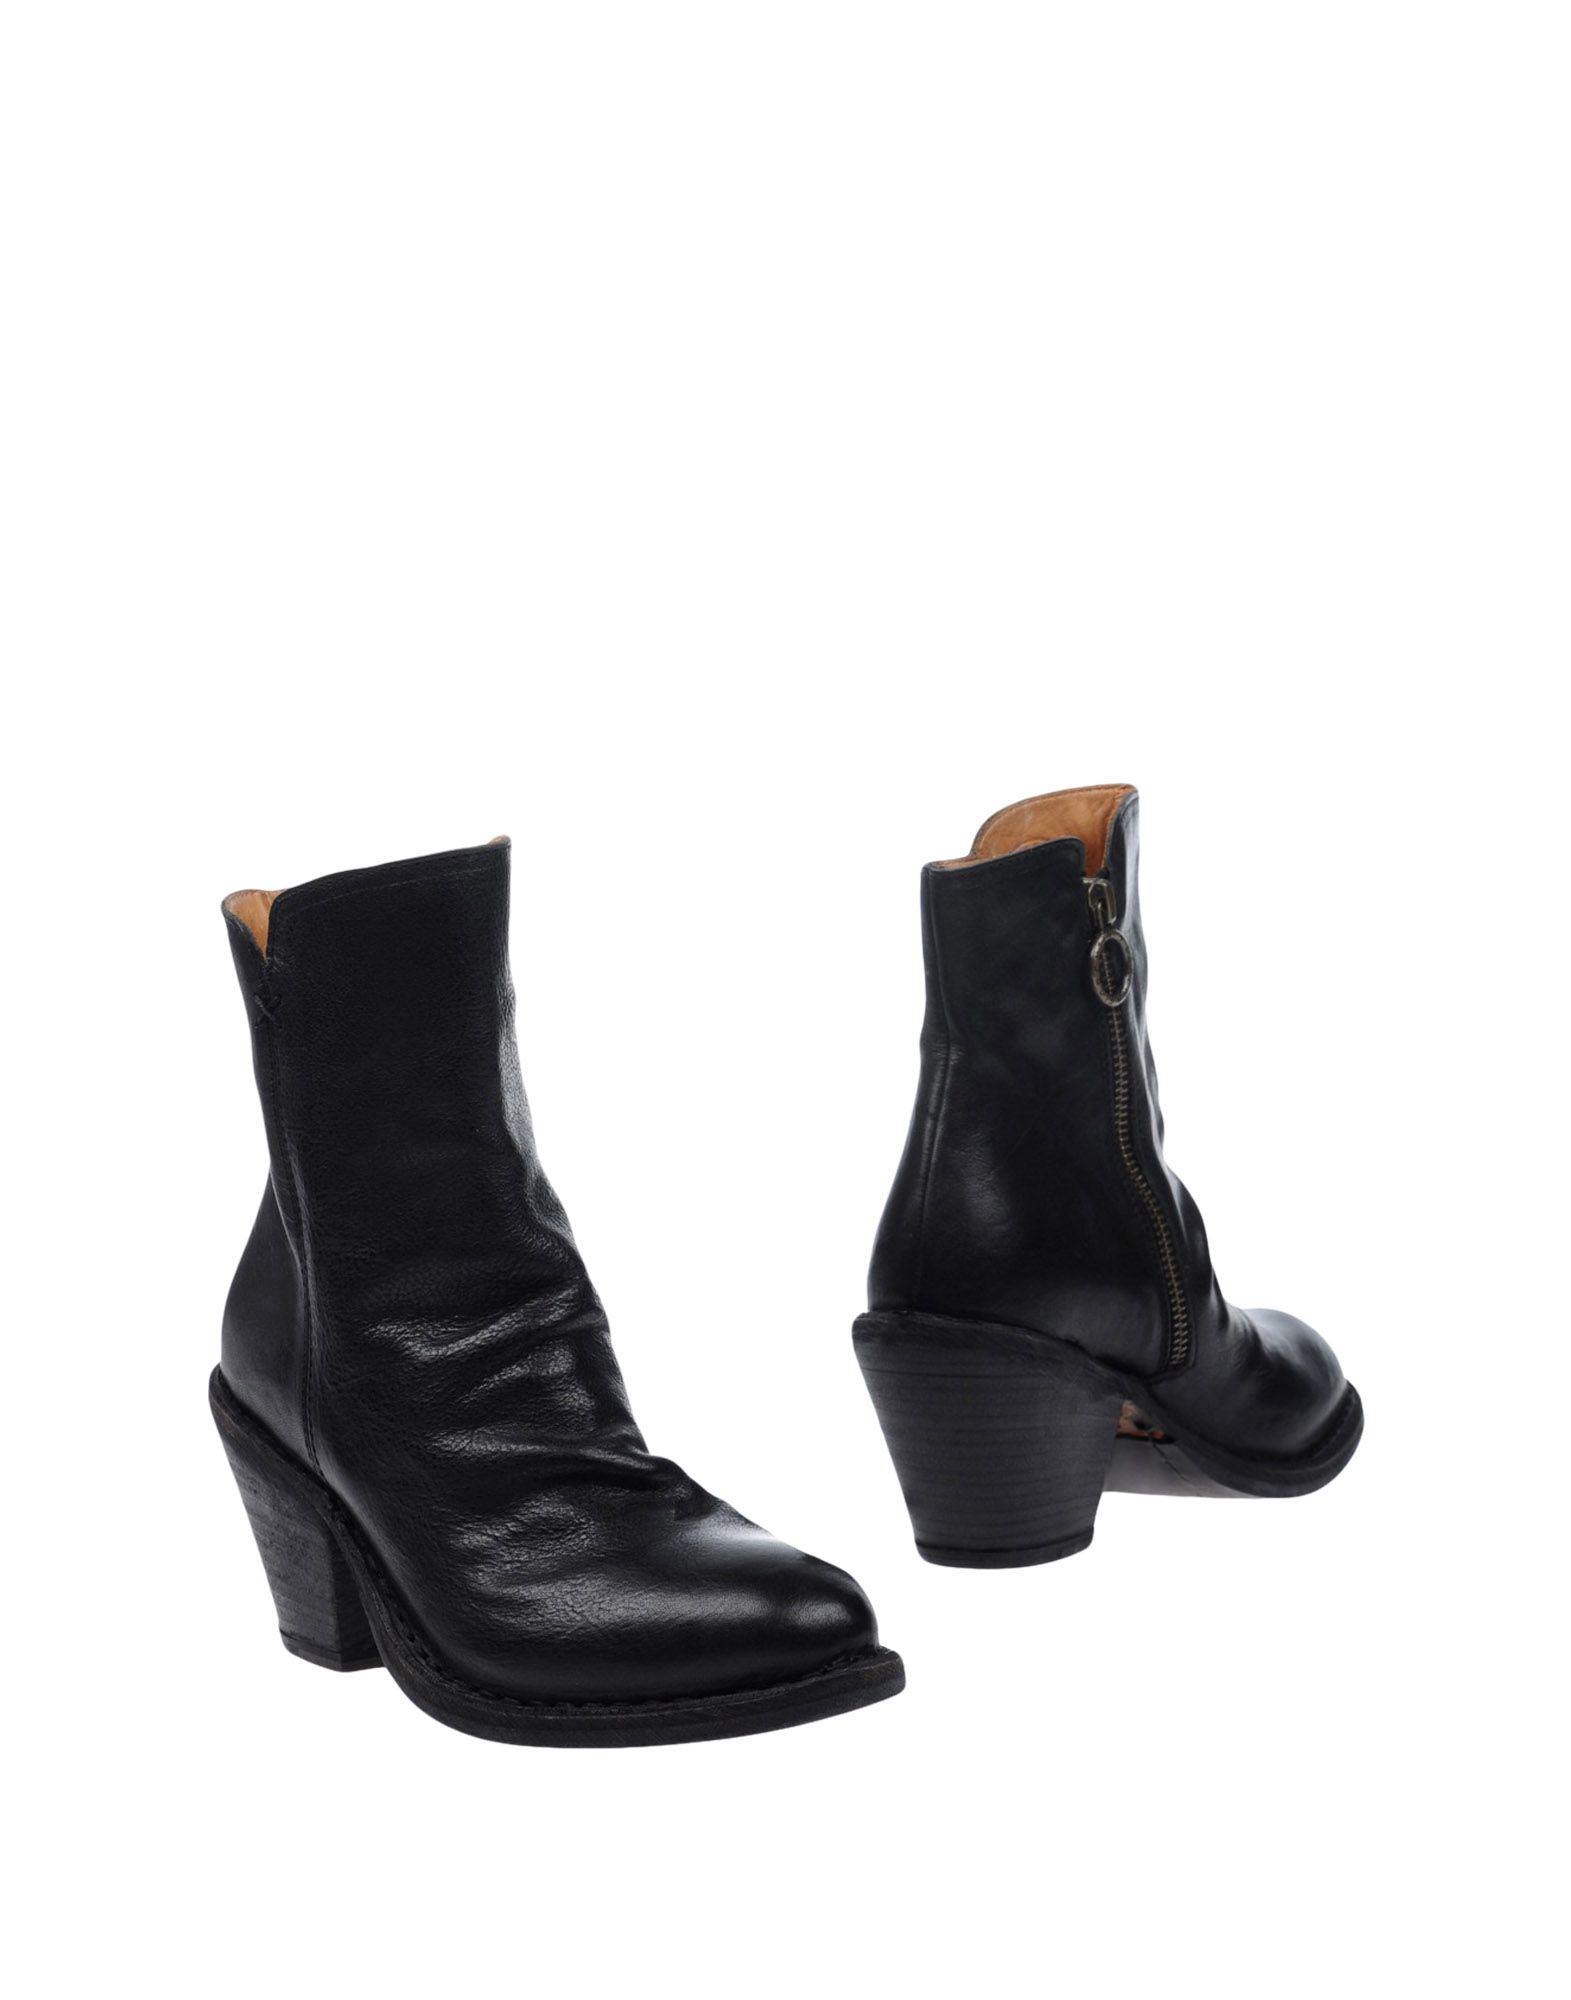 Fiorentini + Baker Ankle Boots in Black - Lyst